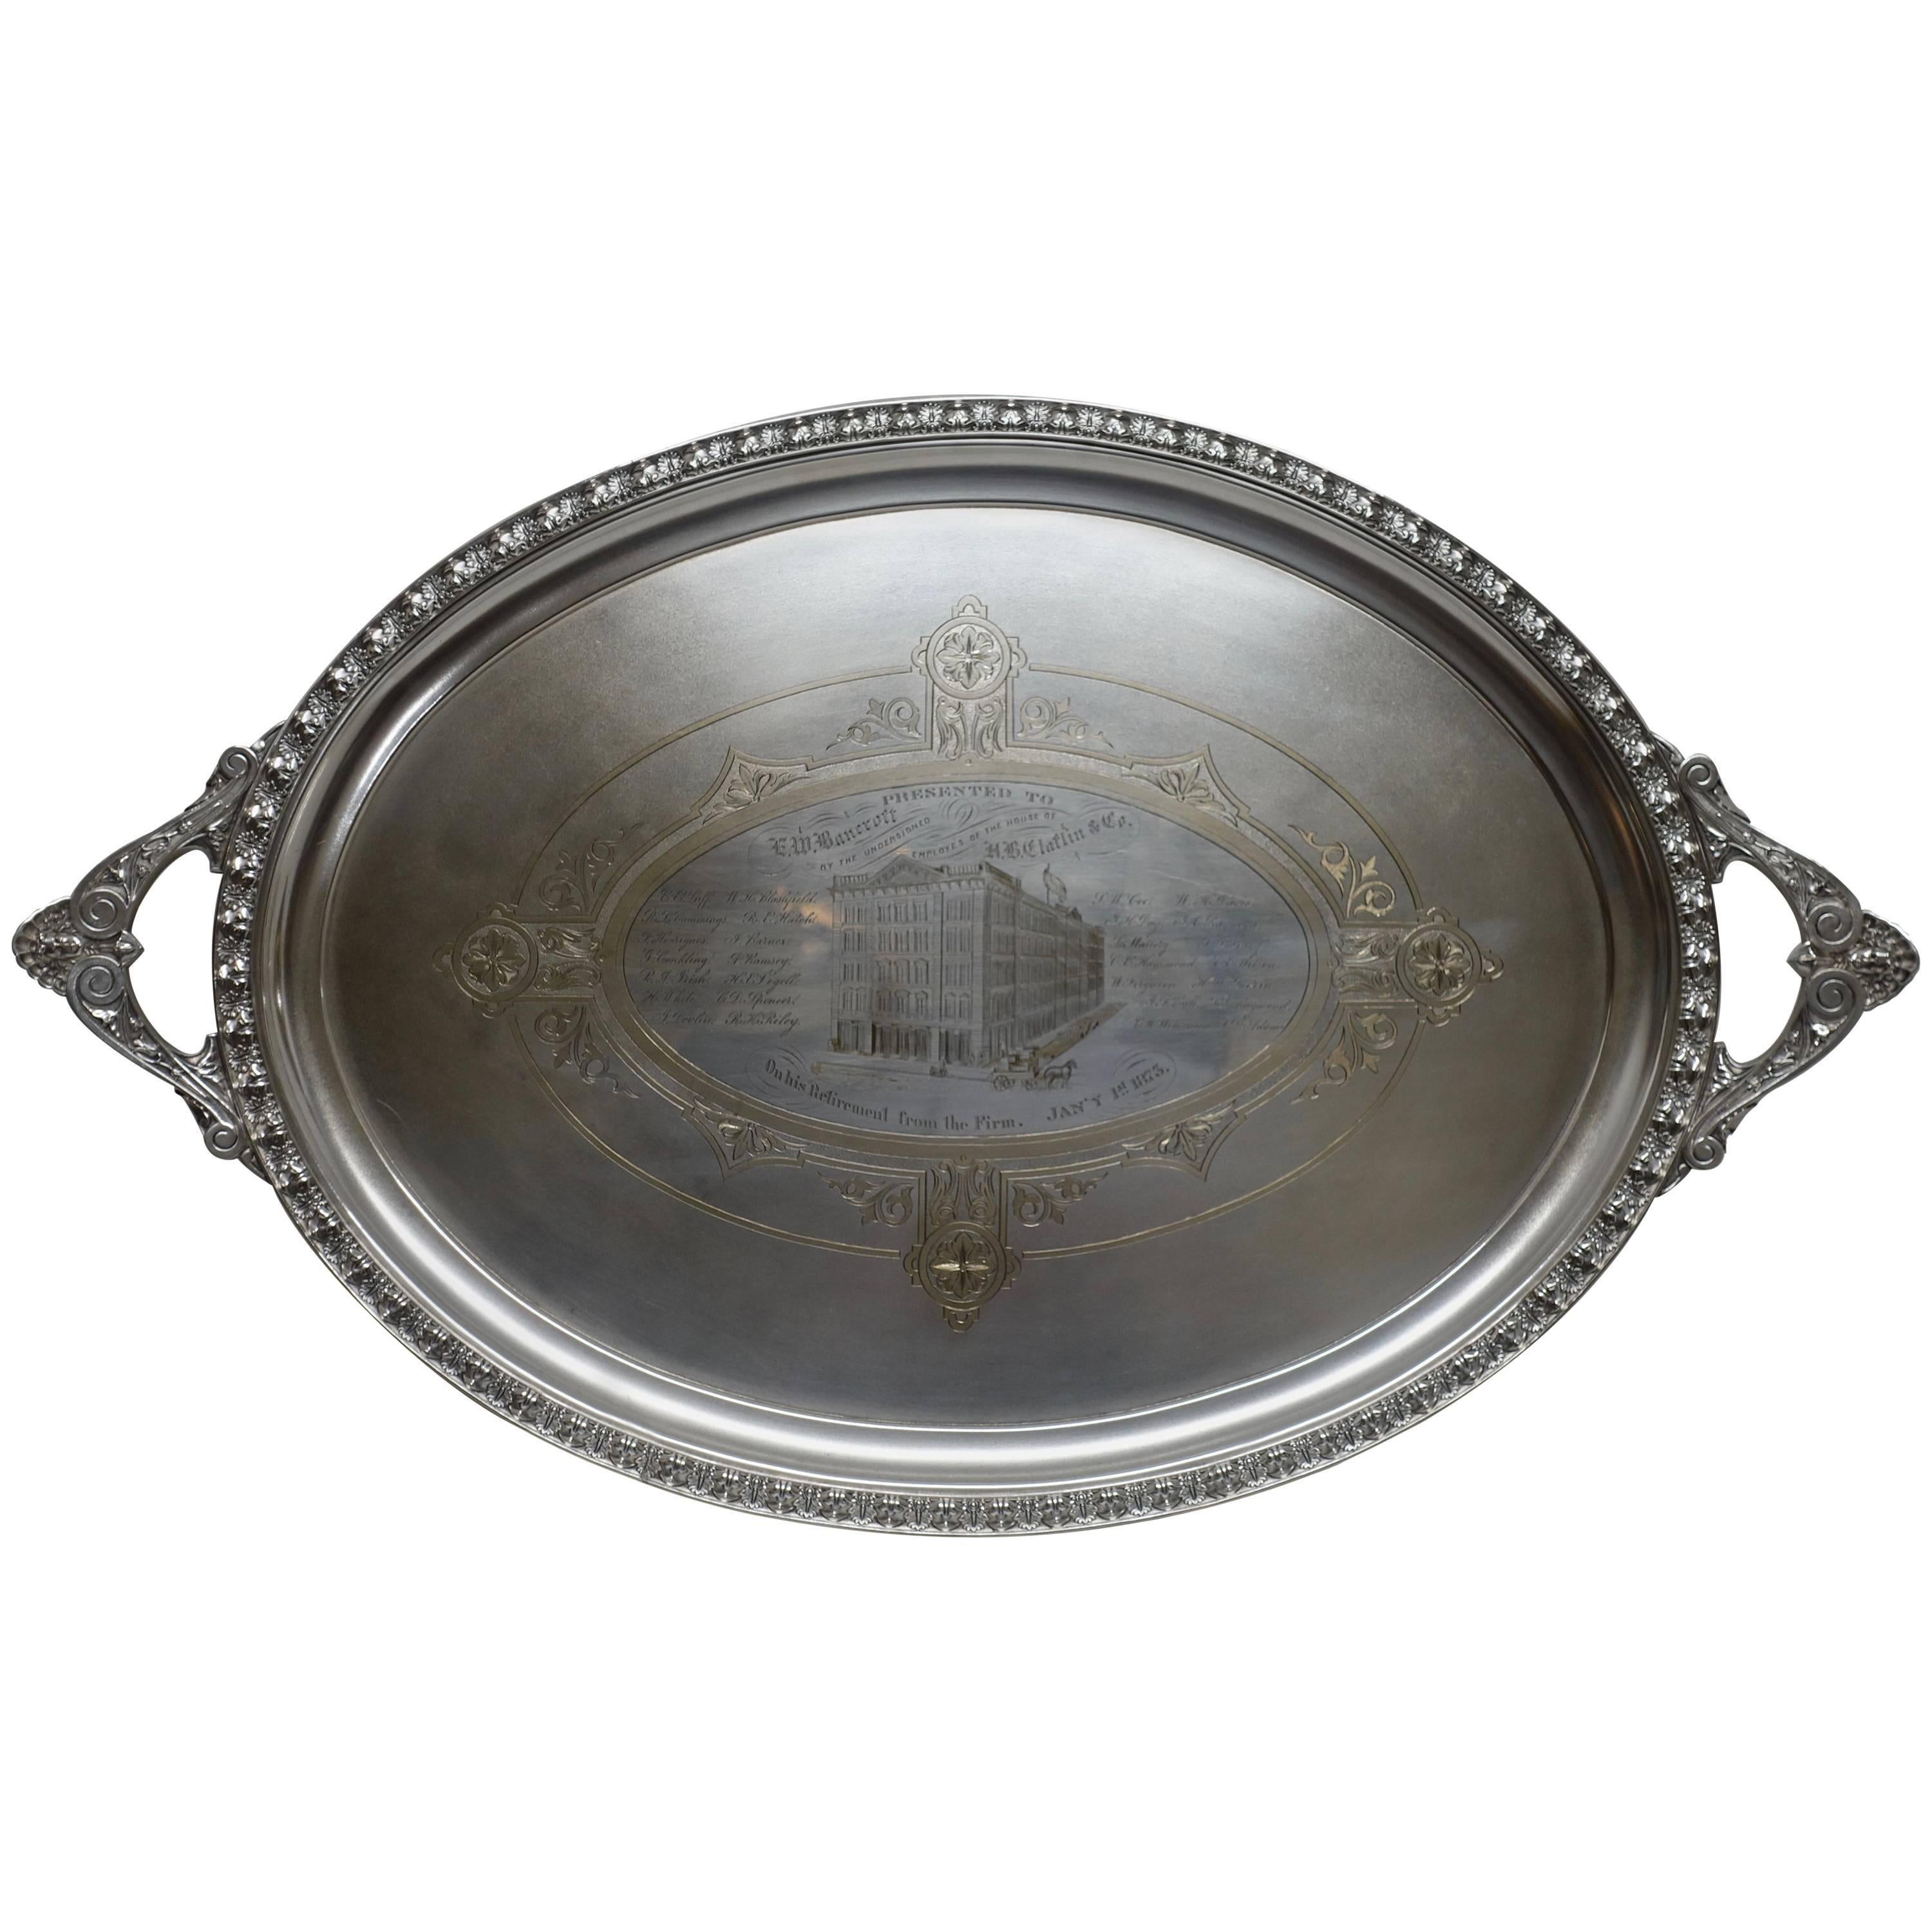 Large Commemorative Aesthetic Movement Silver Plate Tray, American 19th Century